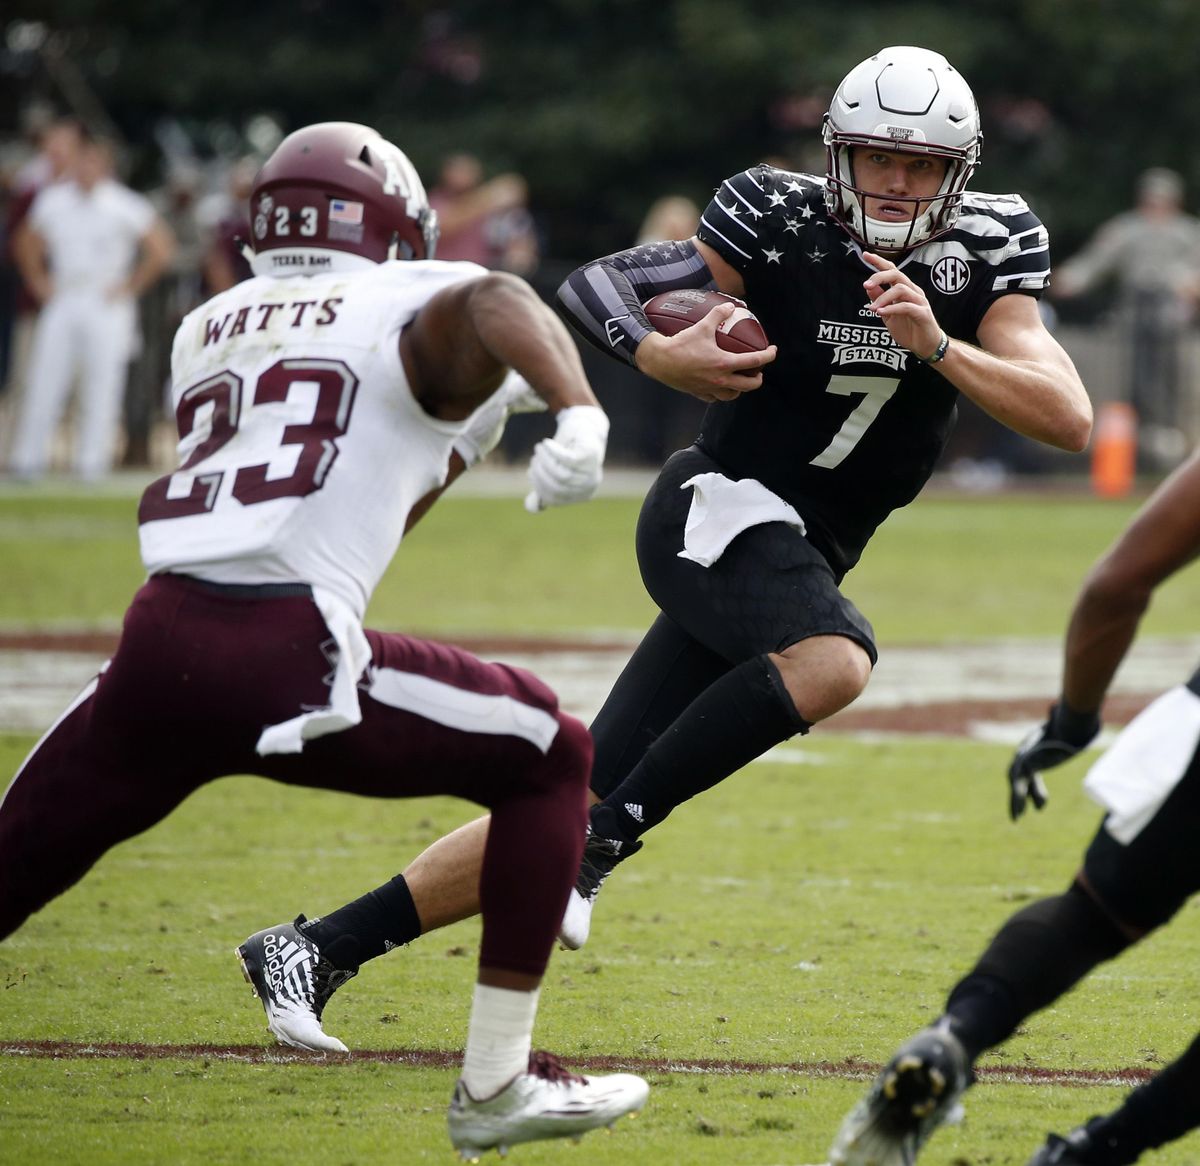 Mississippi State’s quarterback Nick Fitzgerald runs past Texas A&M’s Armani Watts for a first down. (Rogelio V. Solis / Associated Press)